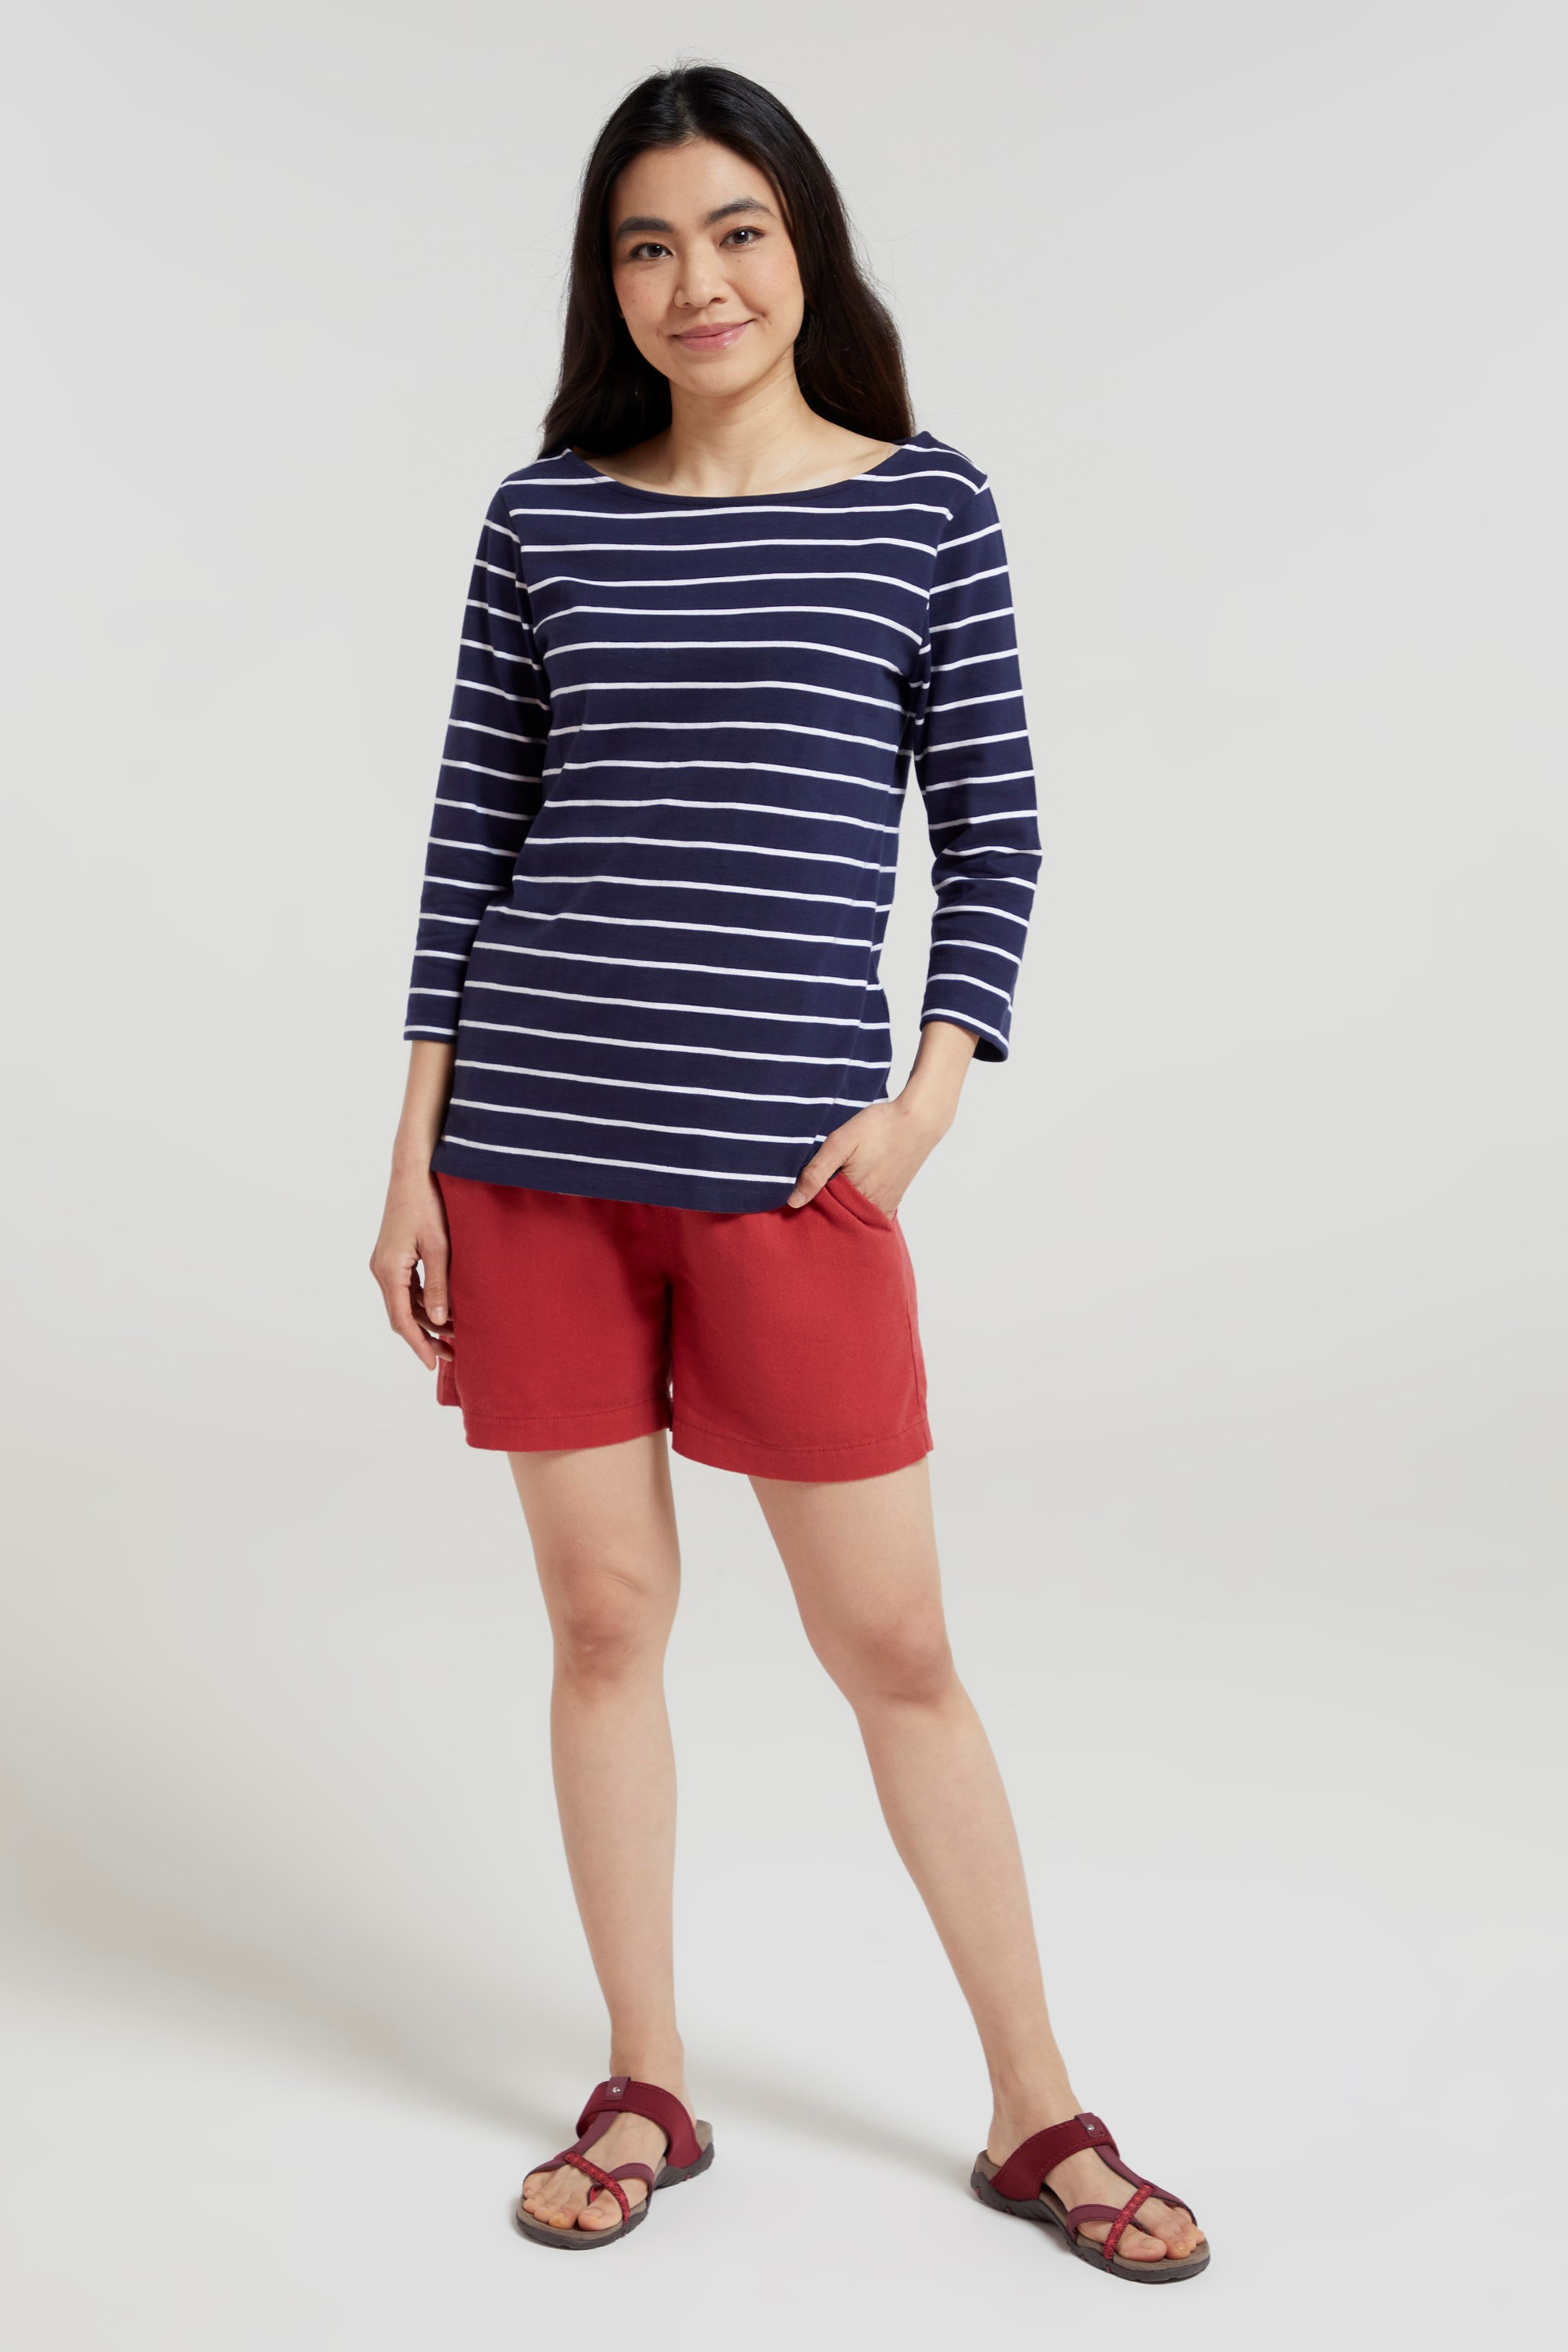 St Ives Womens Crew Neck Top - Navy